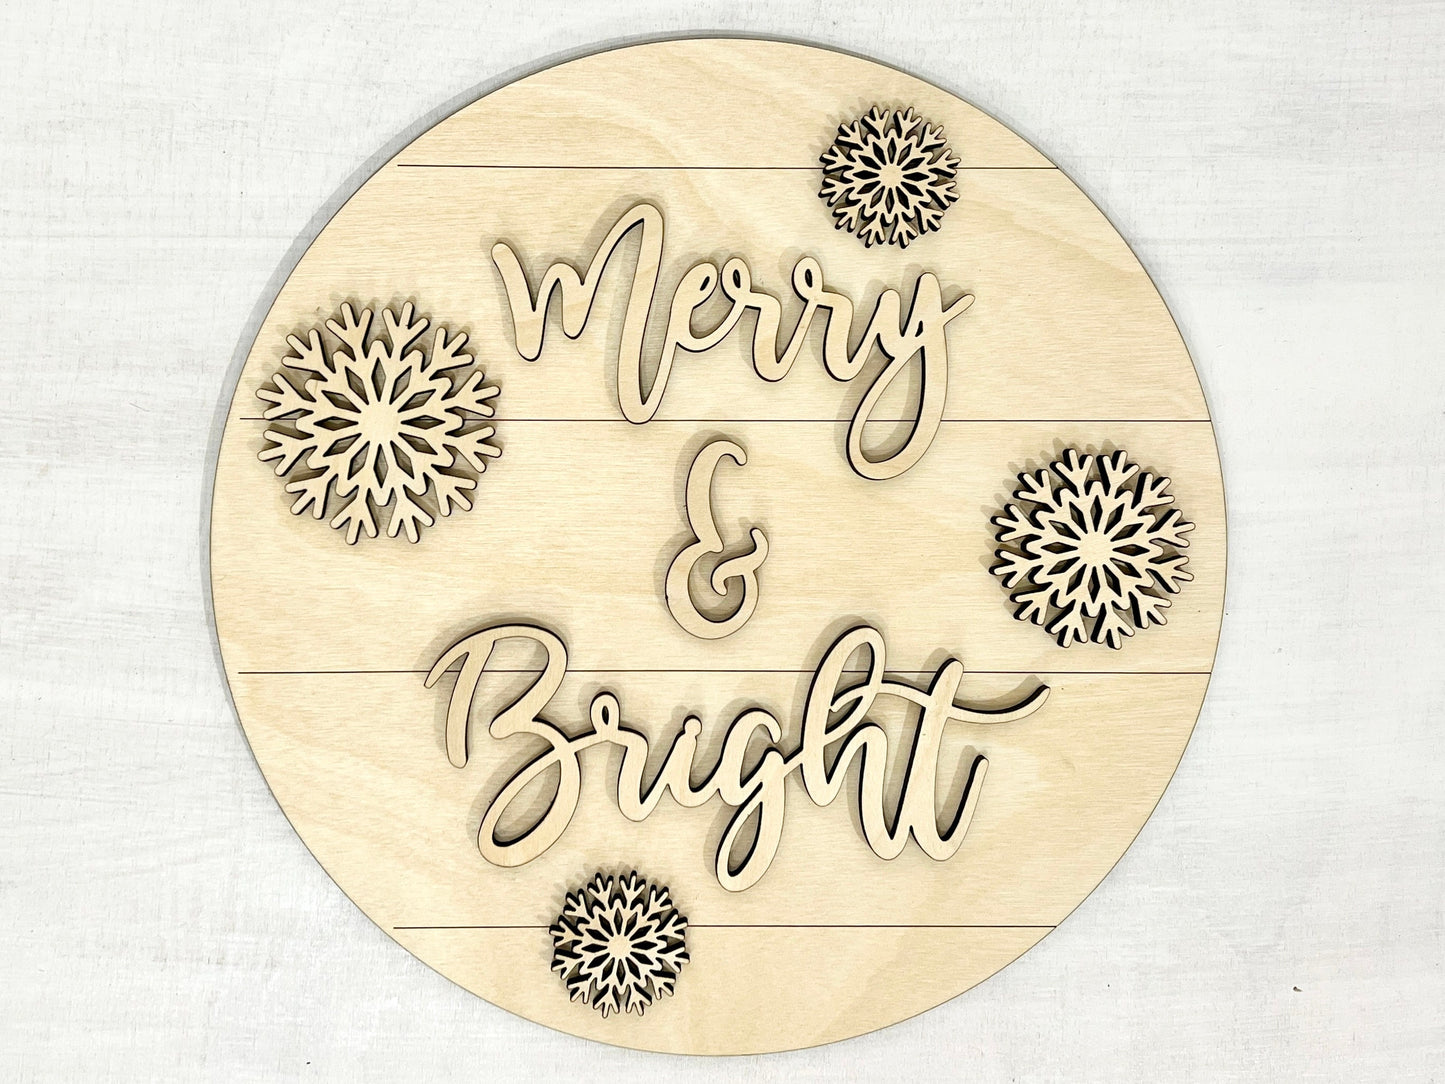 Merry & Bright sign kit, DIY holiday crafts, winter sign making supplies, snowflake kids craft project ideas, paint party sign bundle